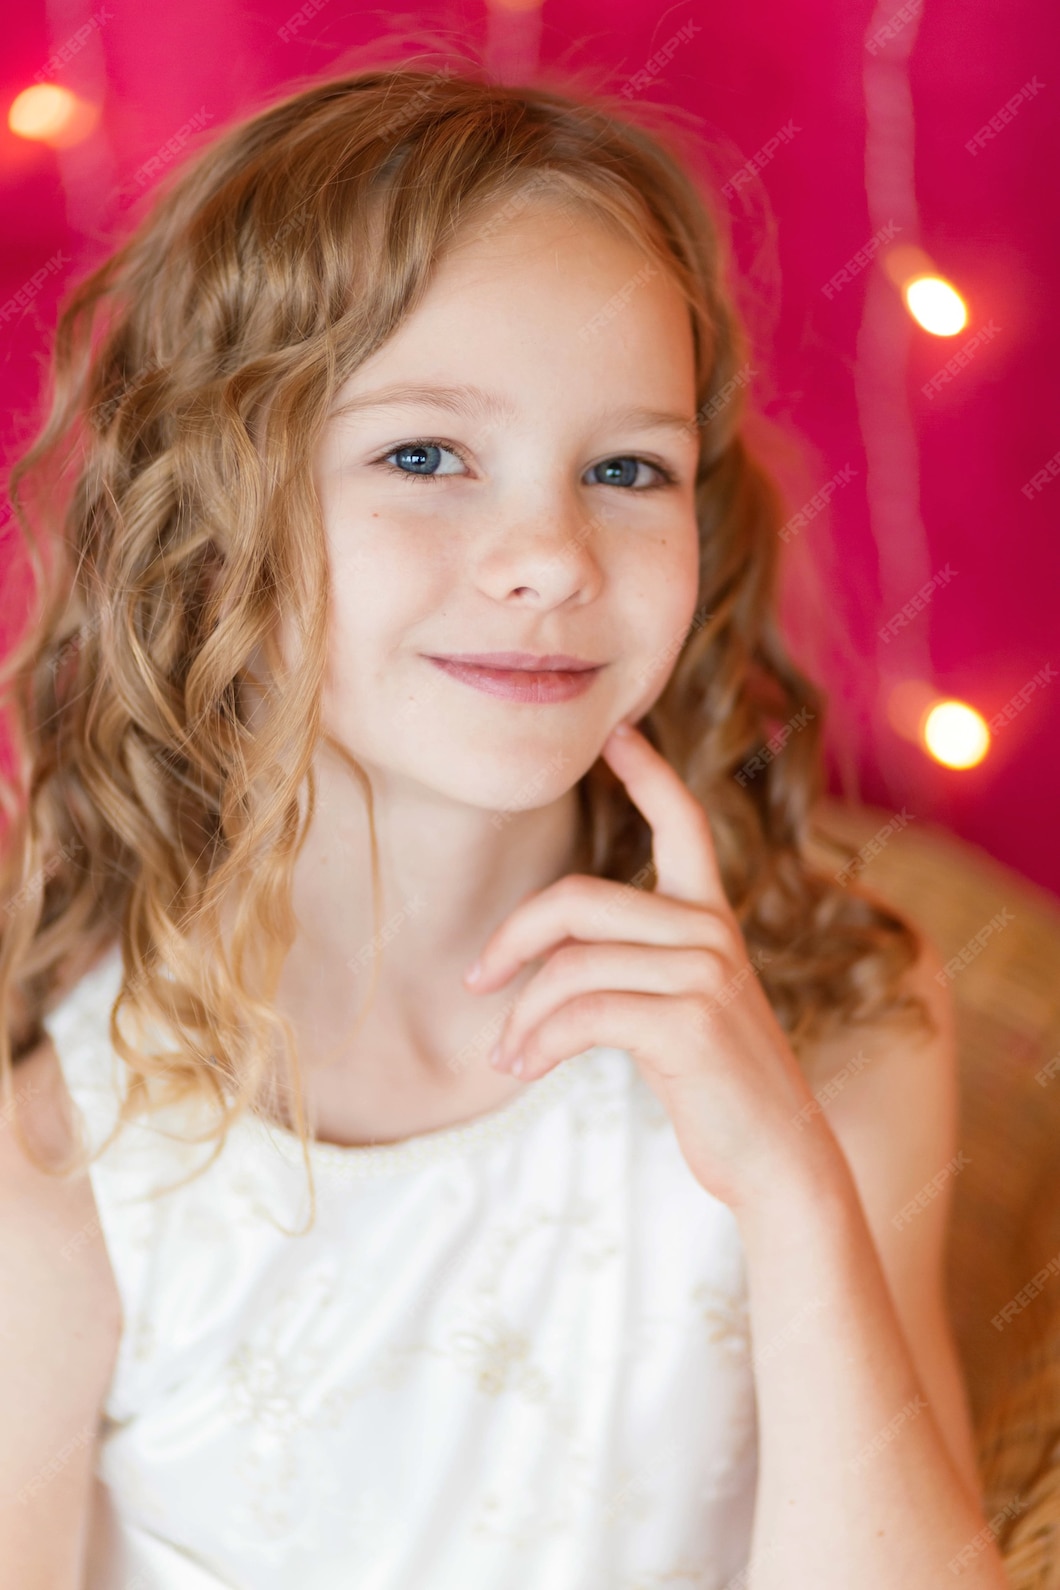 Premium Photo | Portrait of a cute 10 year old girl on the of christmas ...